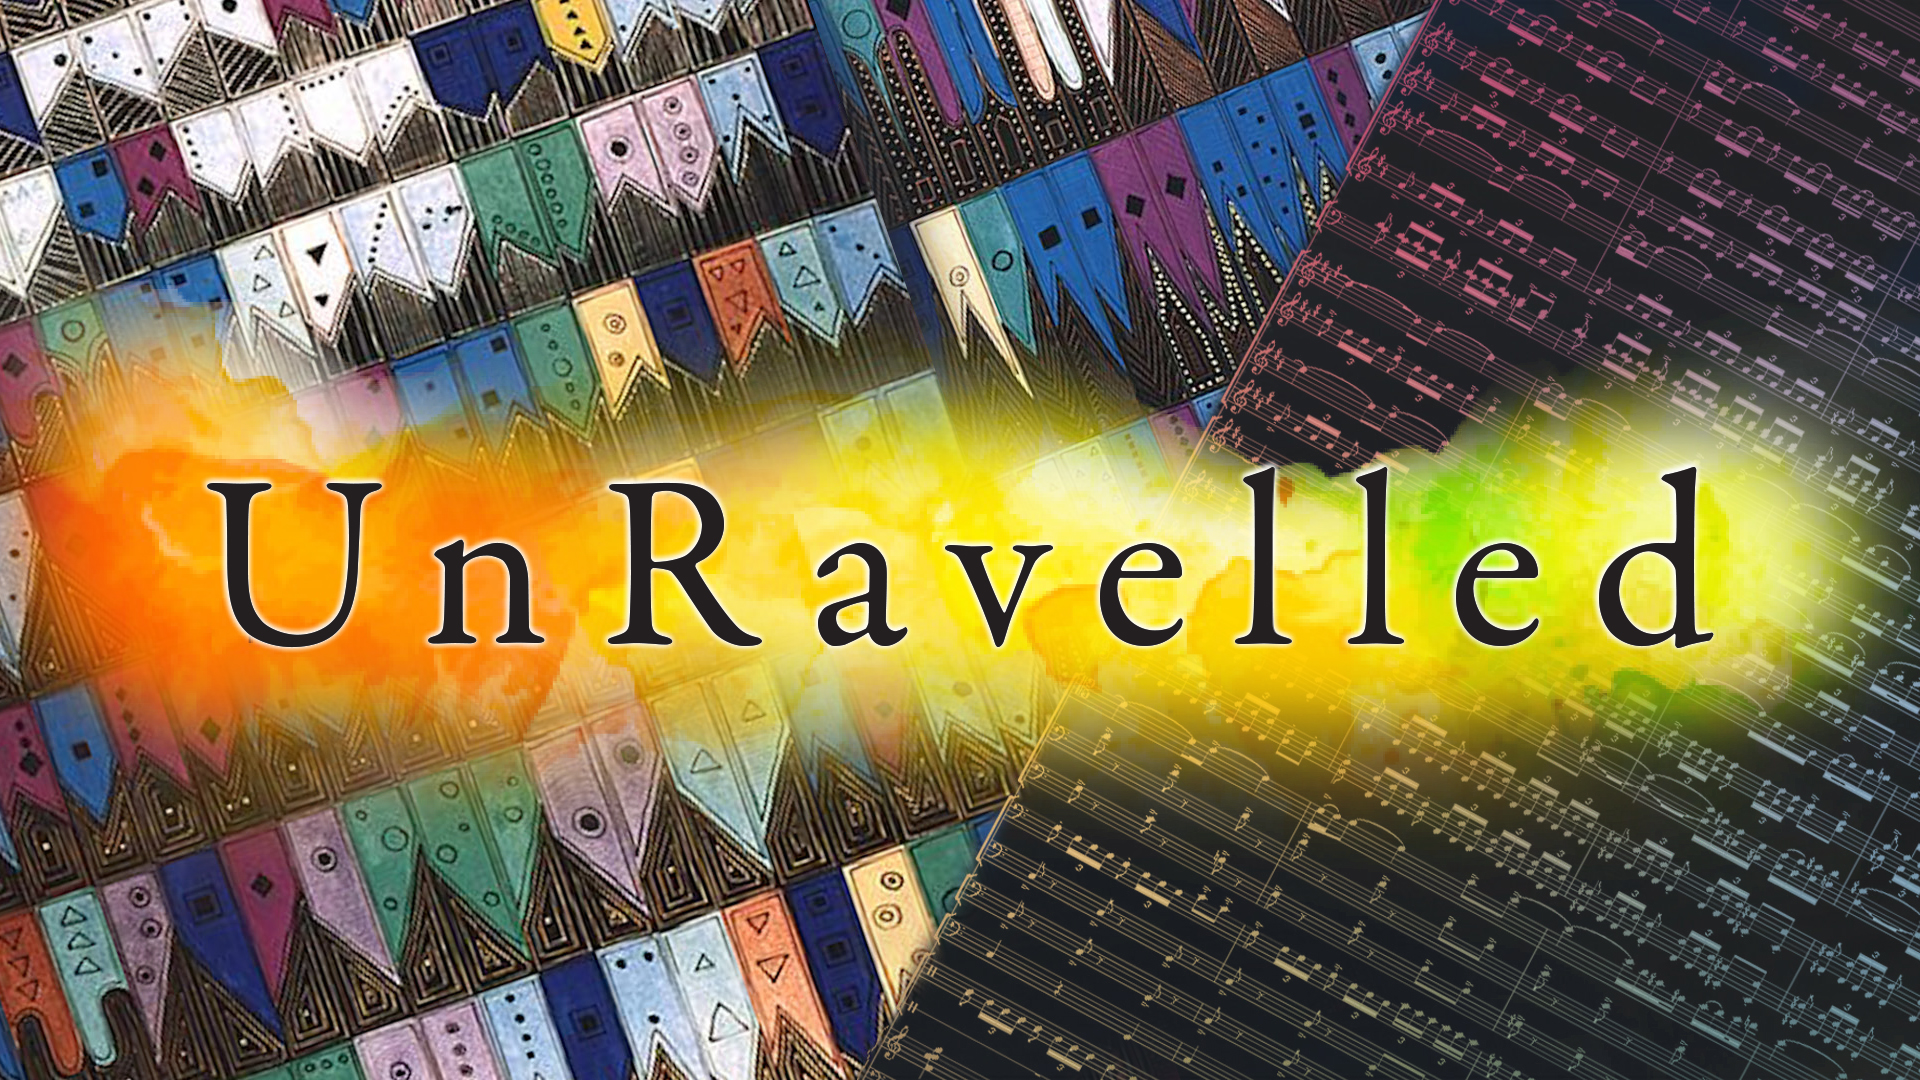 UnRavelled title on top of painting by Anne Adams and score by Maurice Ravel